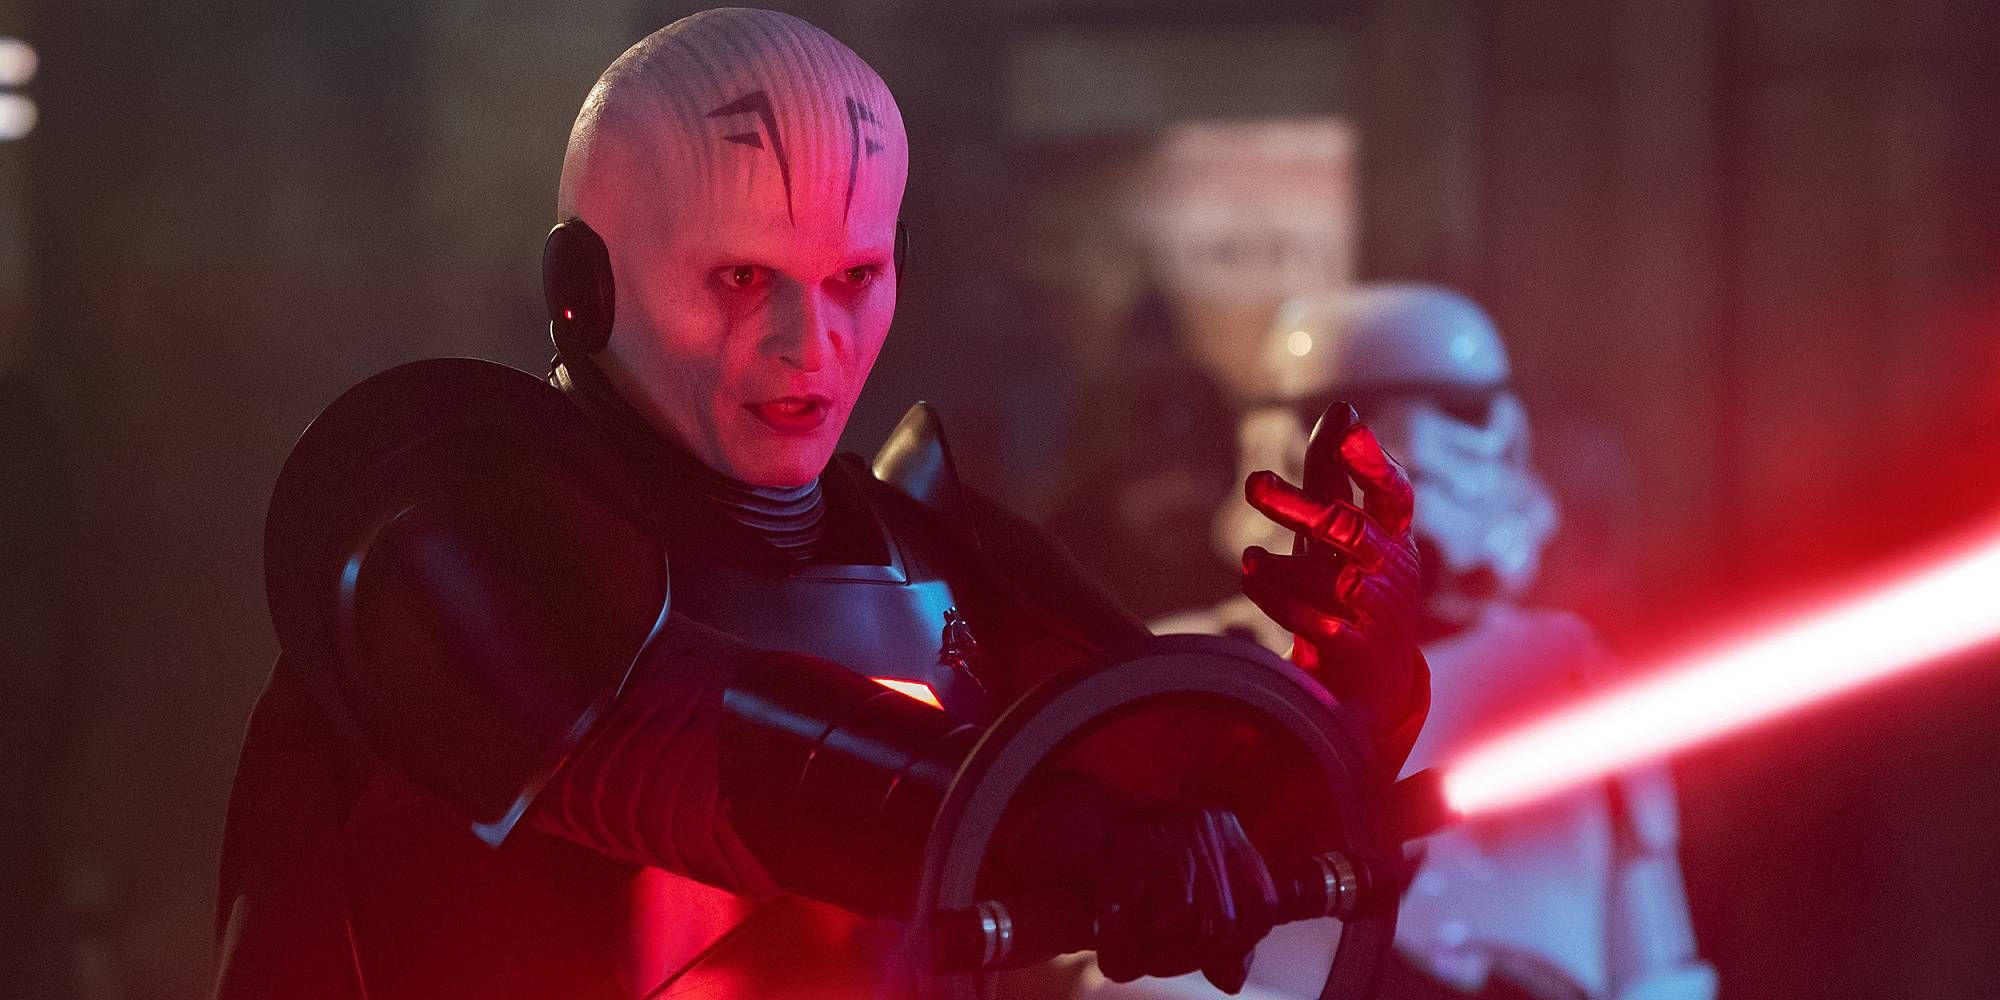 The Grand Inquisitor stands holding a red lightsaber